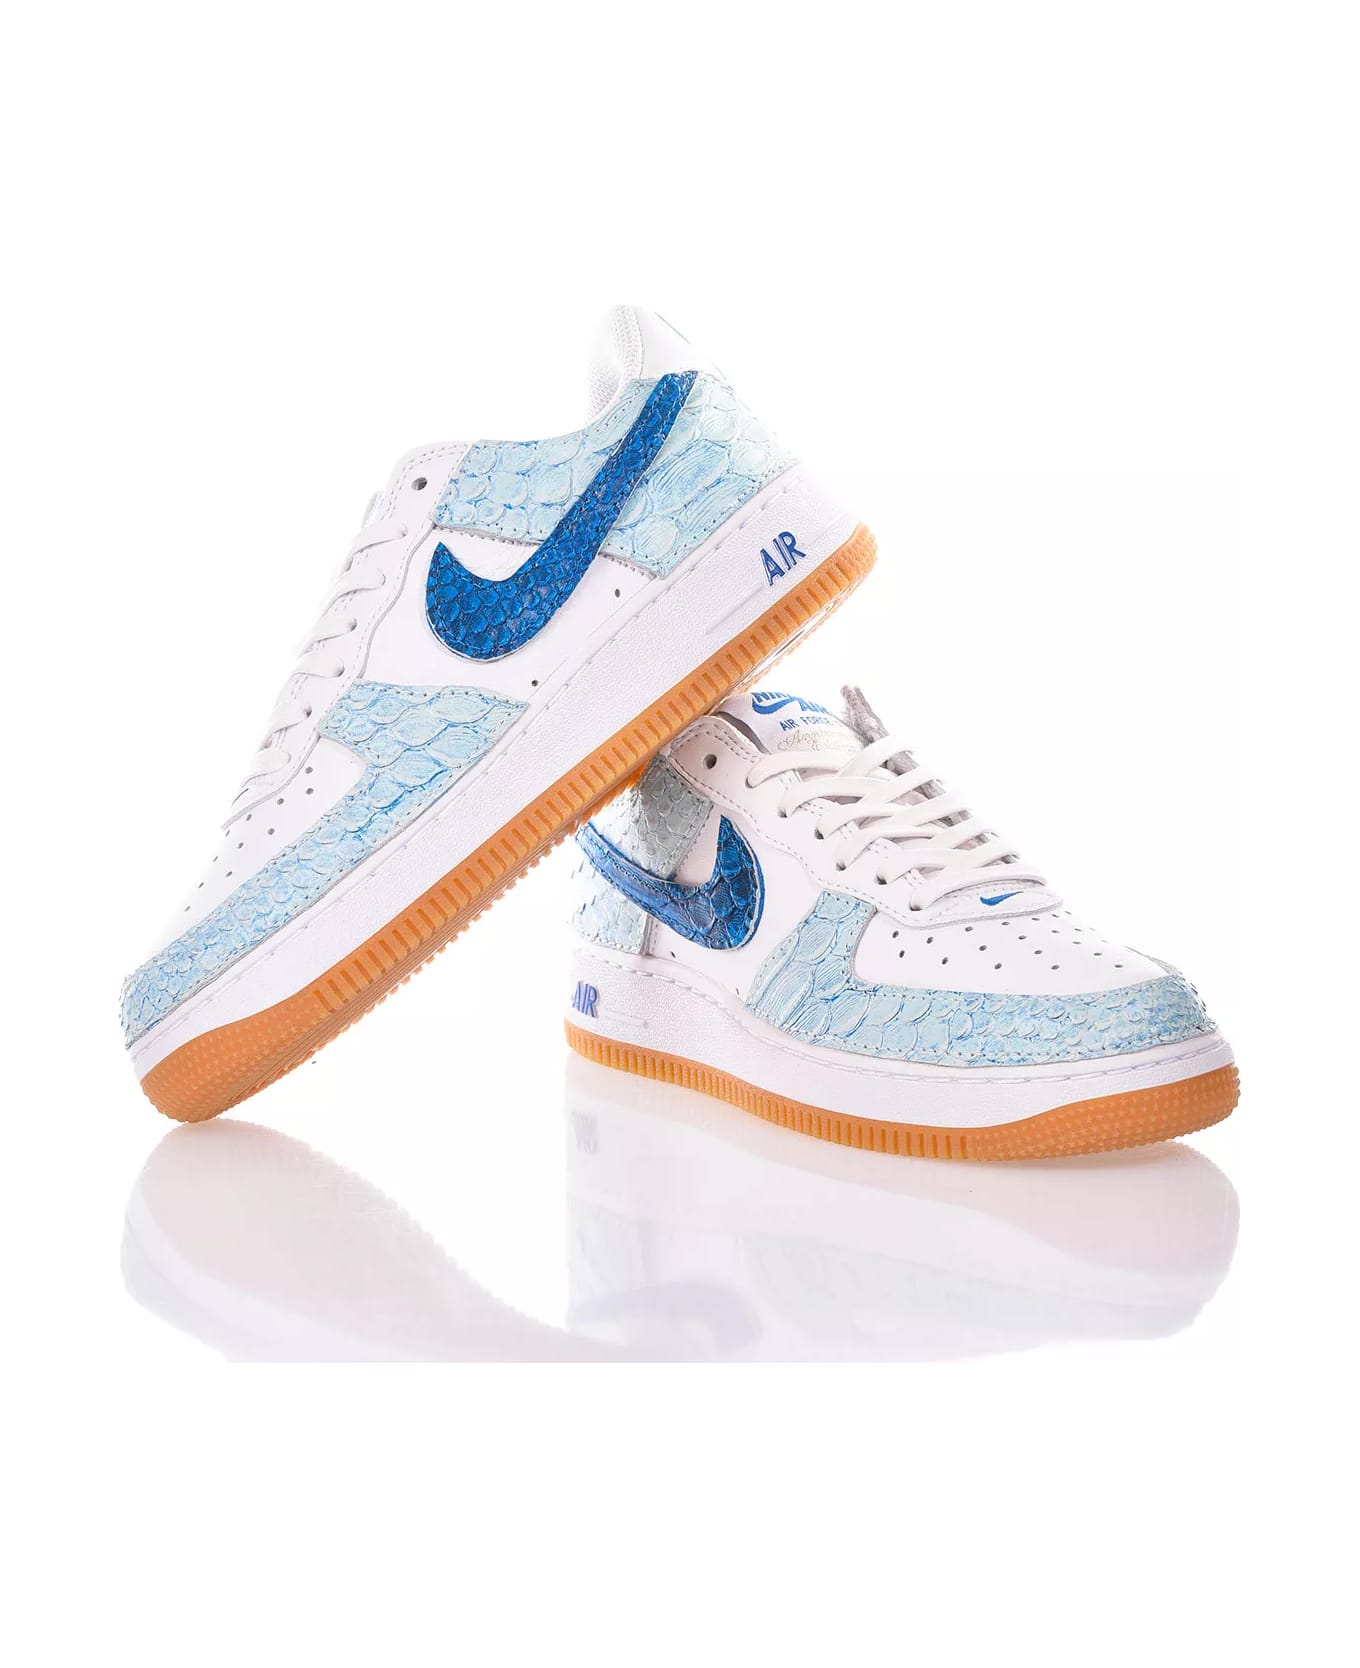 Mimanera Nike Air Force 1 Celestial With Blue Swoosh スニーカー